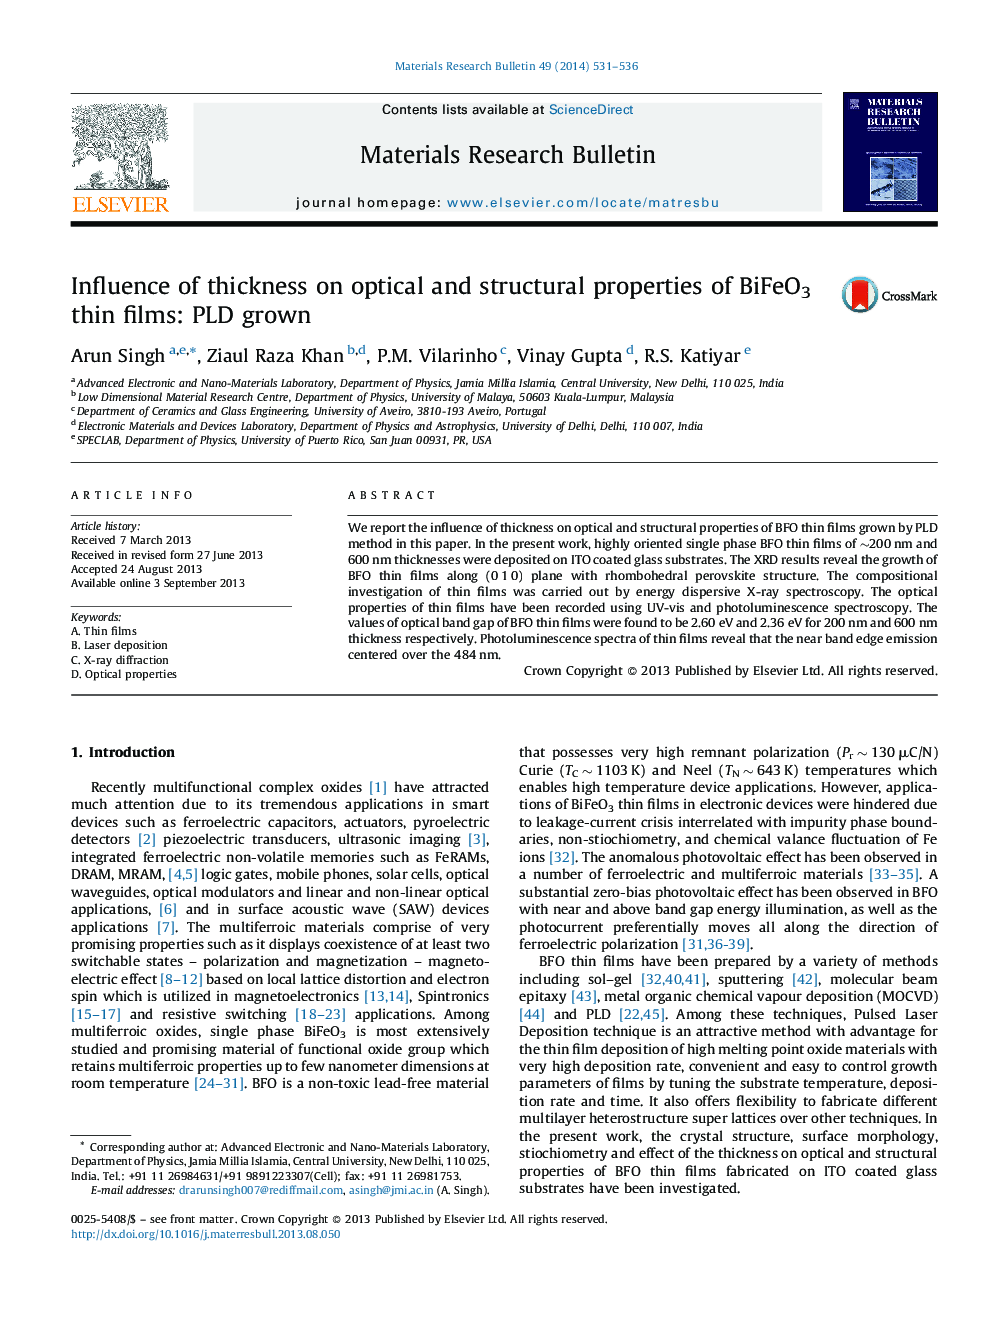 Influence of thickness on optical and structural properties of BiFeO3 thin films: PLD grown